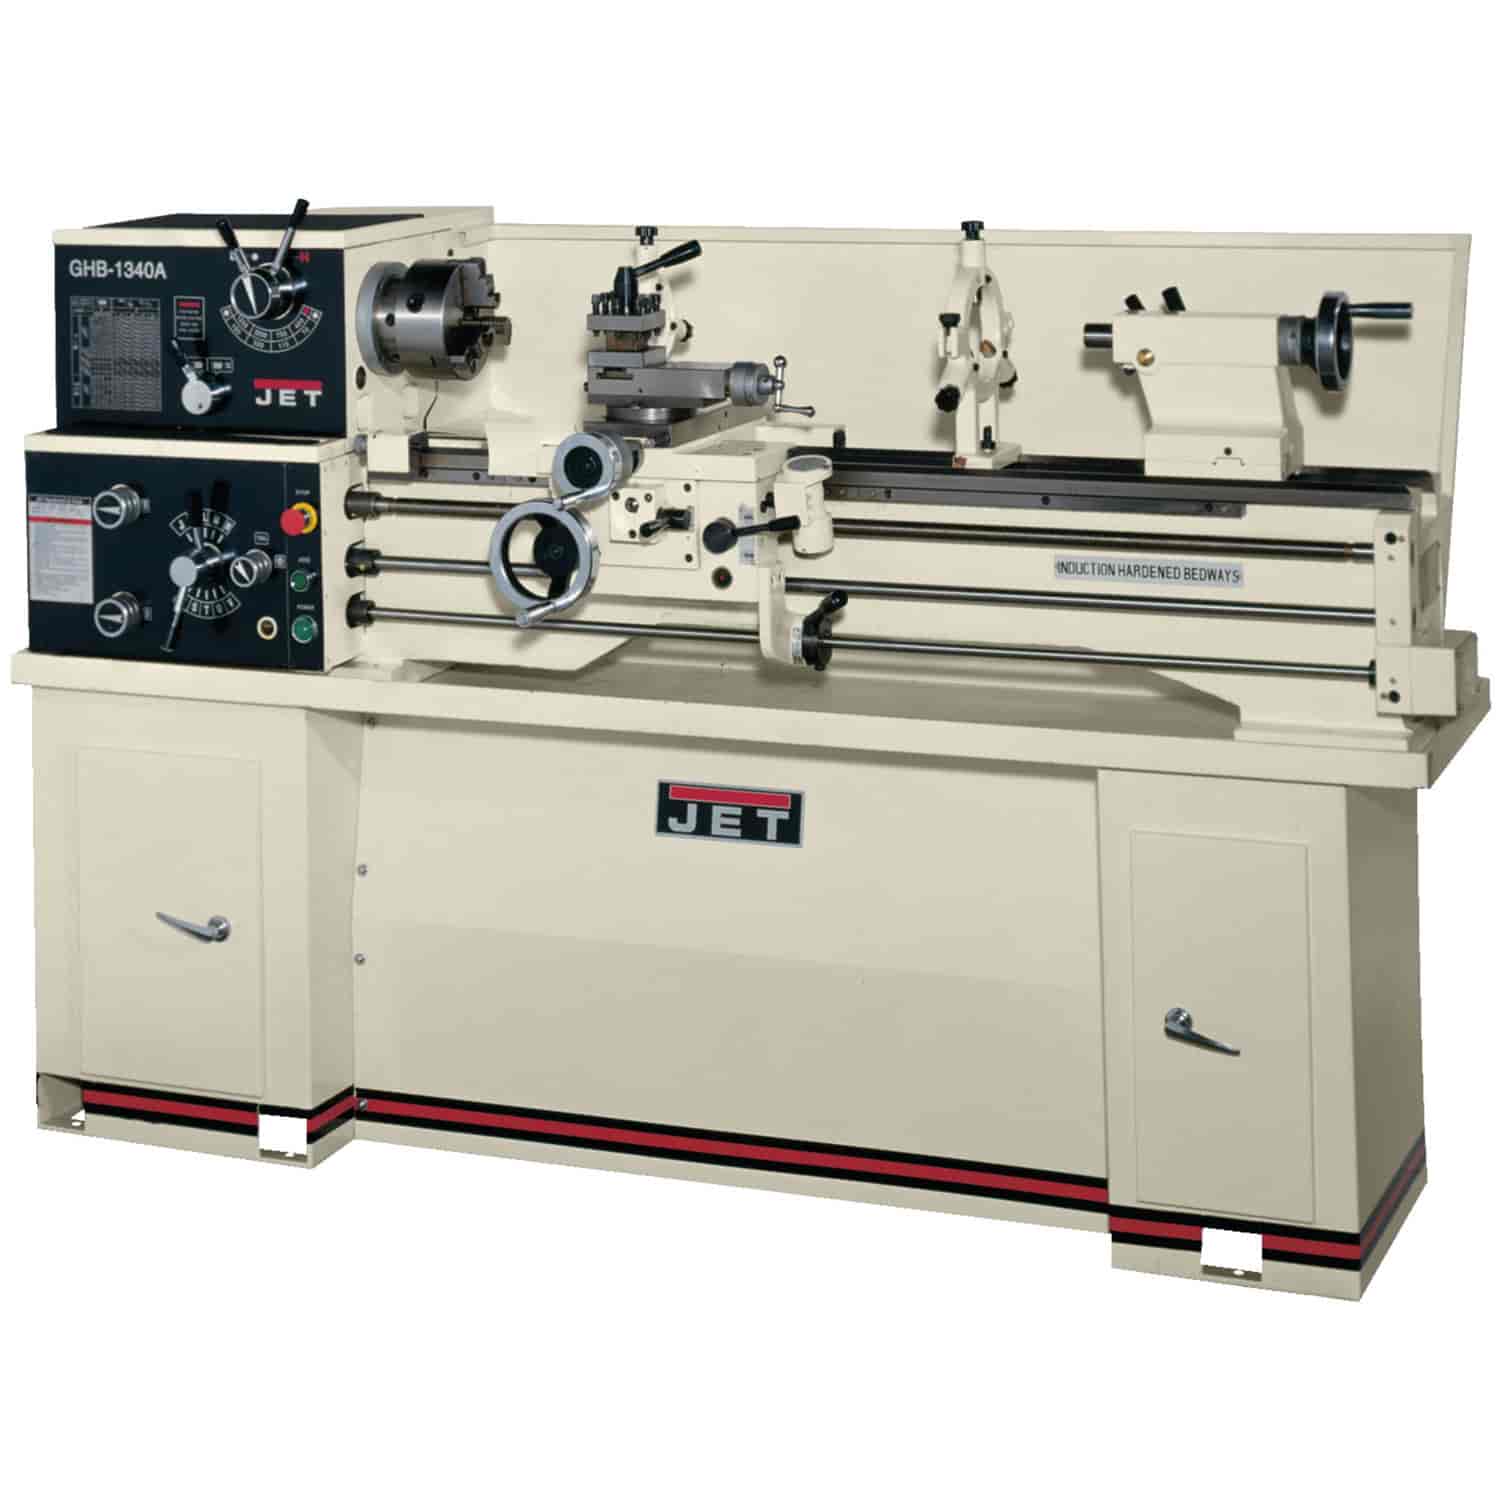 GHB-1340A Lathe With Newall DP500 DRO With Taper Attachment and Collet Closer